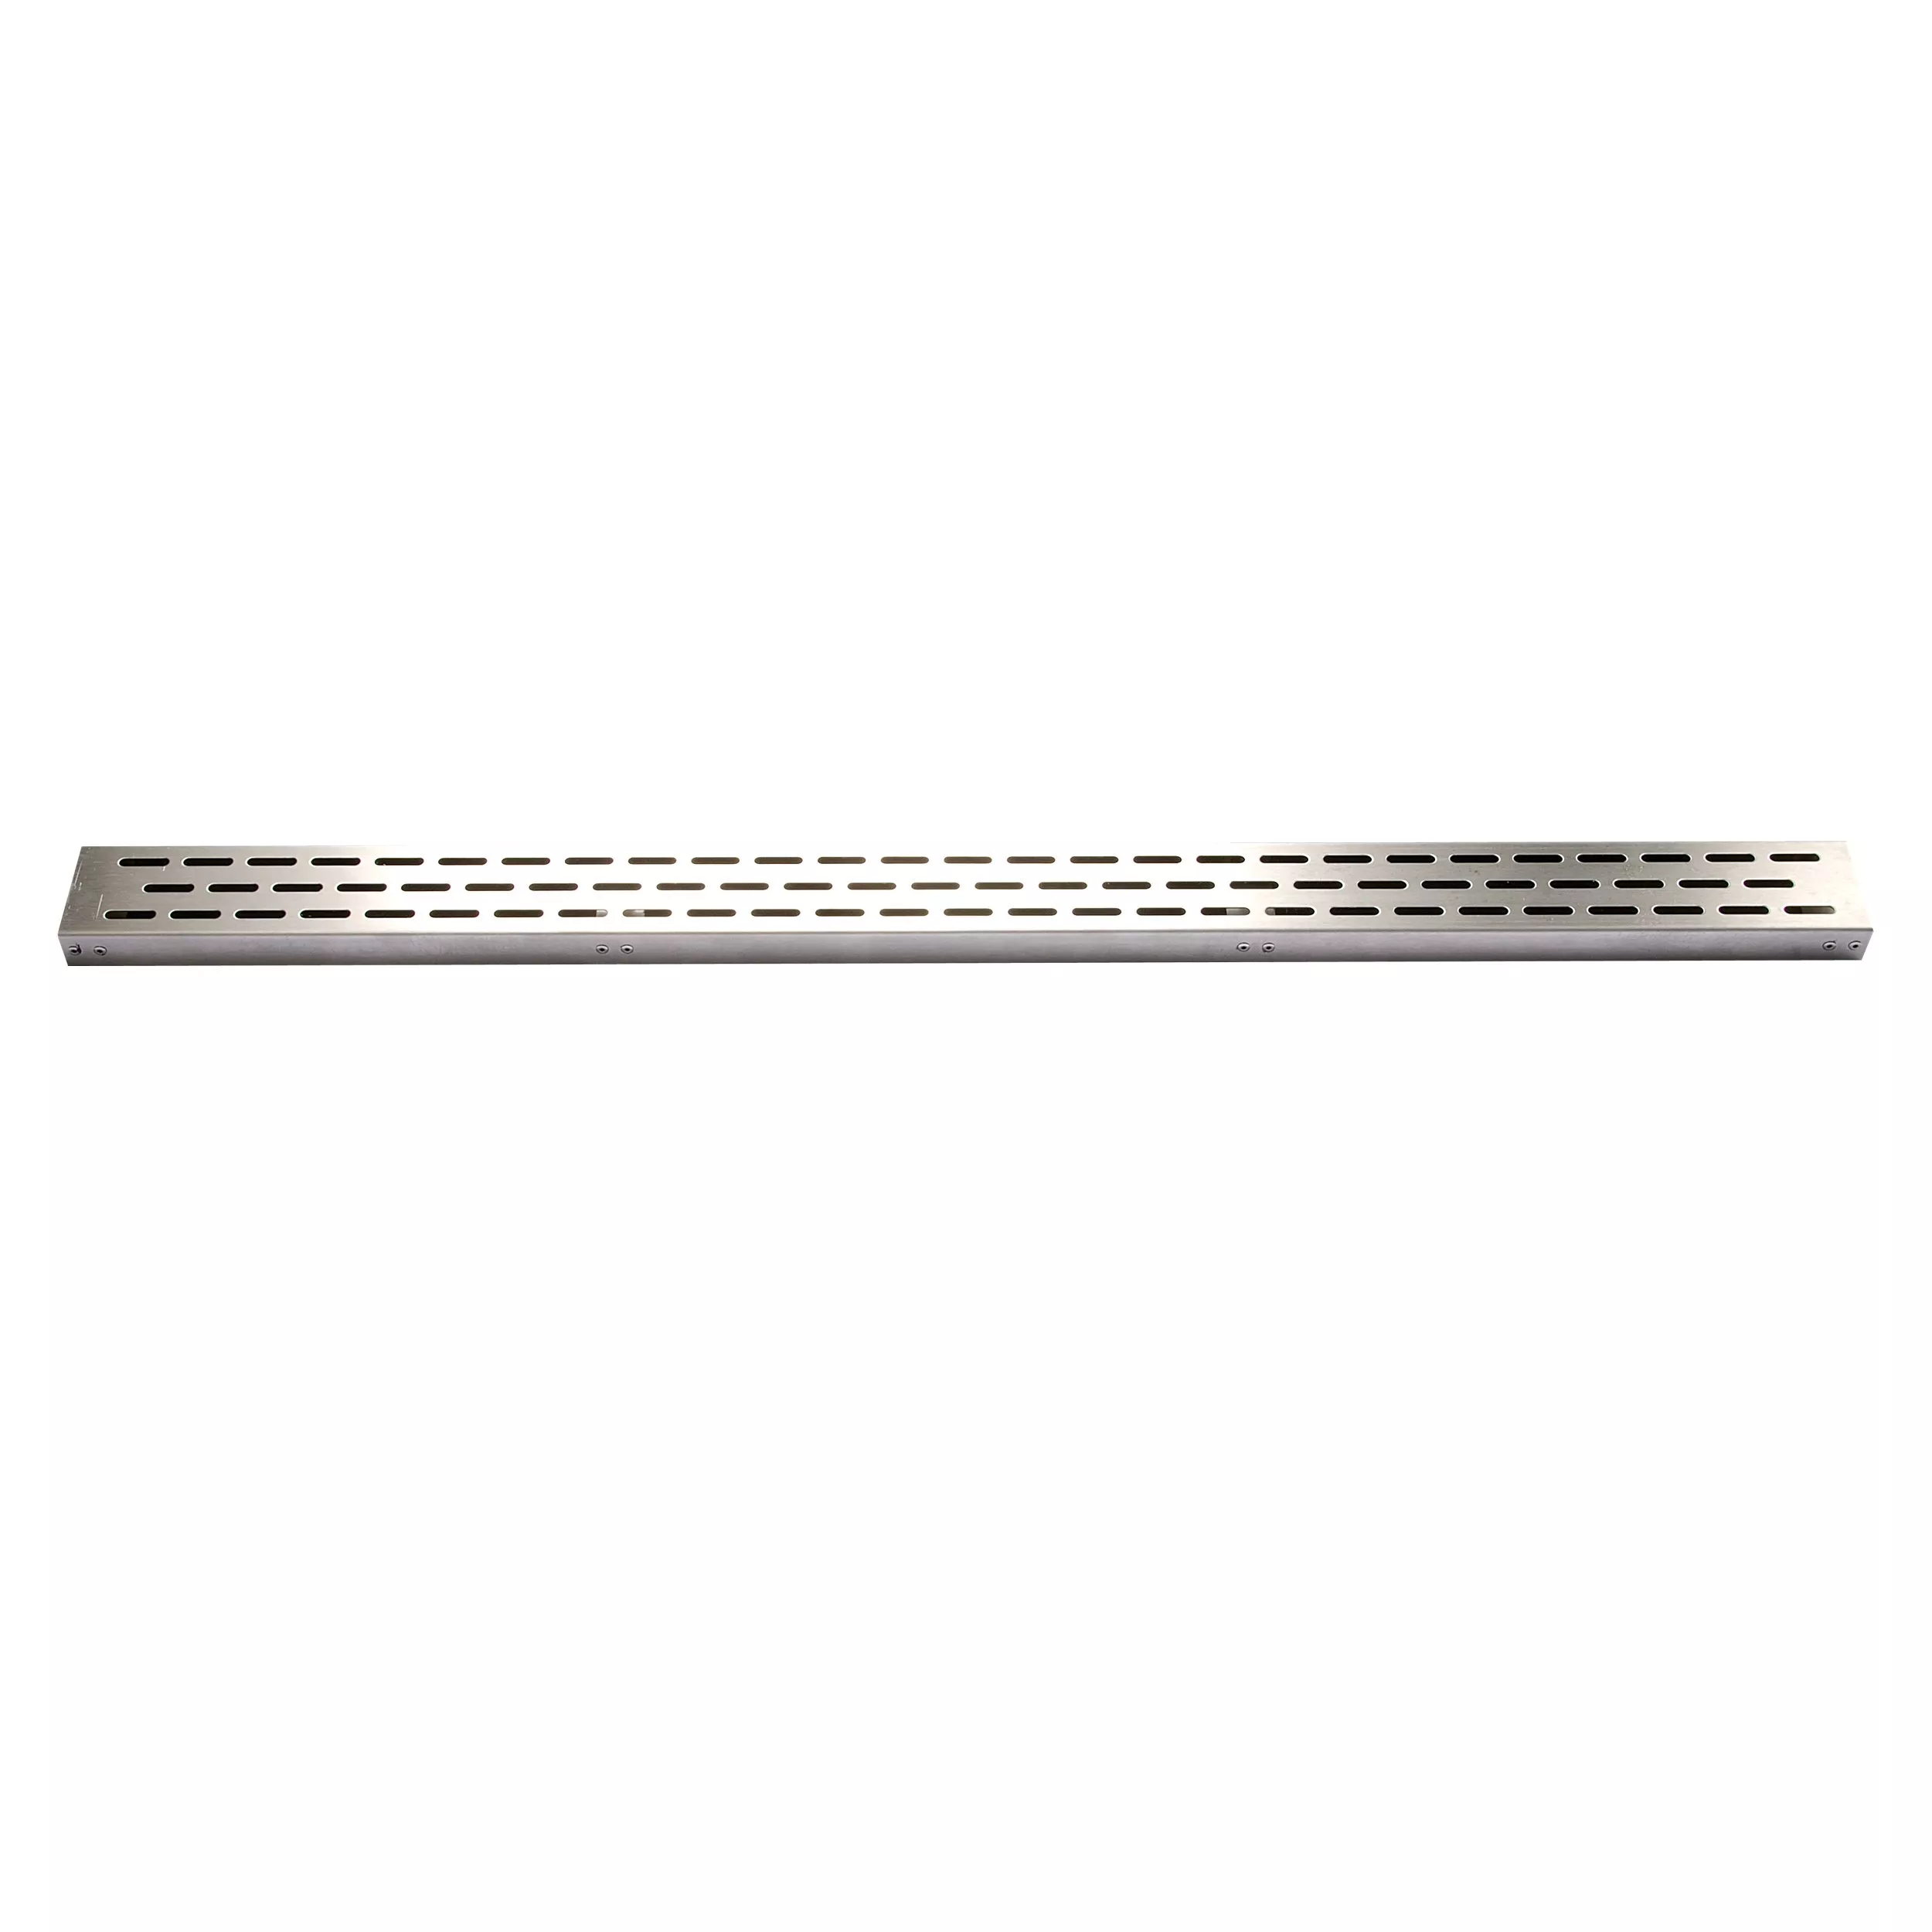 Laticrete Hydro Ban 32 in. Offset Oval Brushed Steel Linear Grate ...